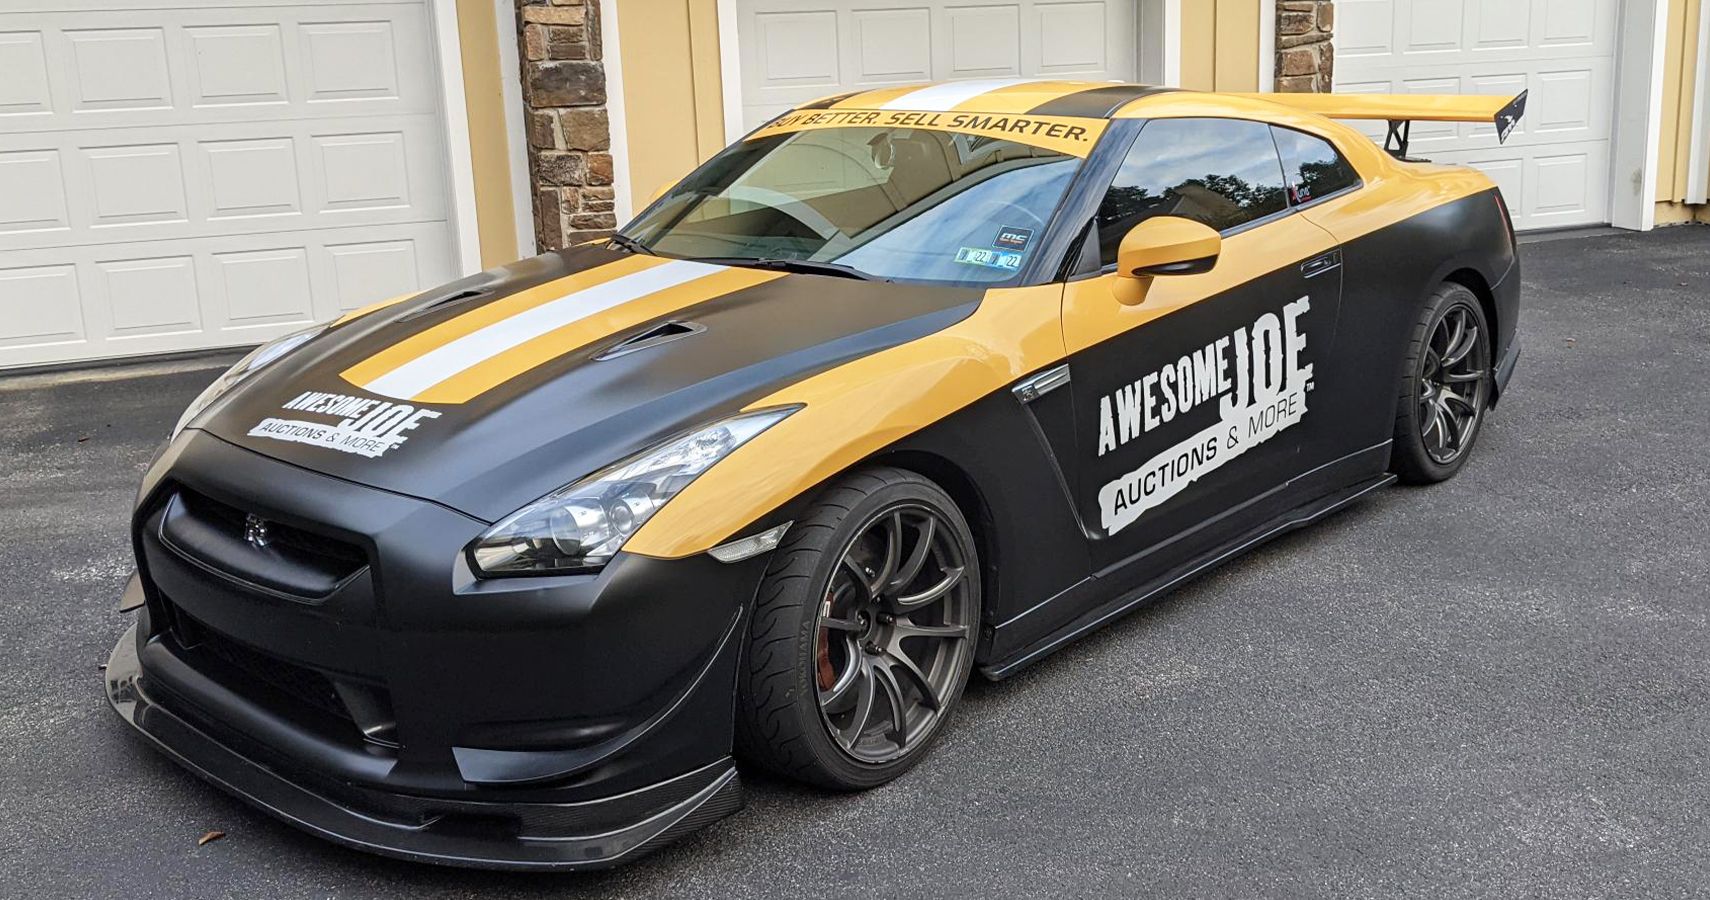 Awesome Joe Auctions GT-R